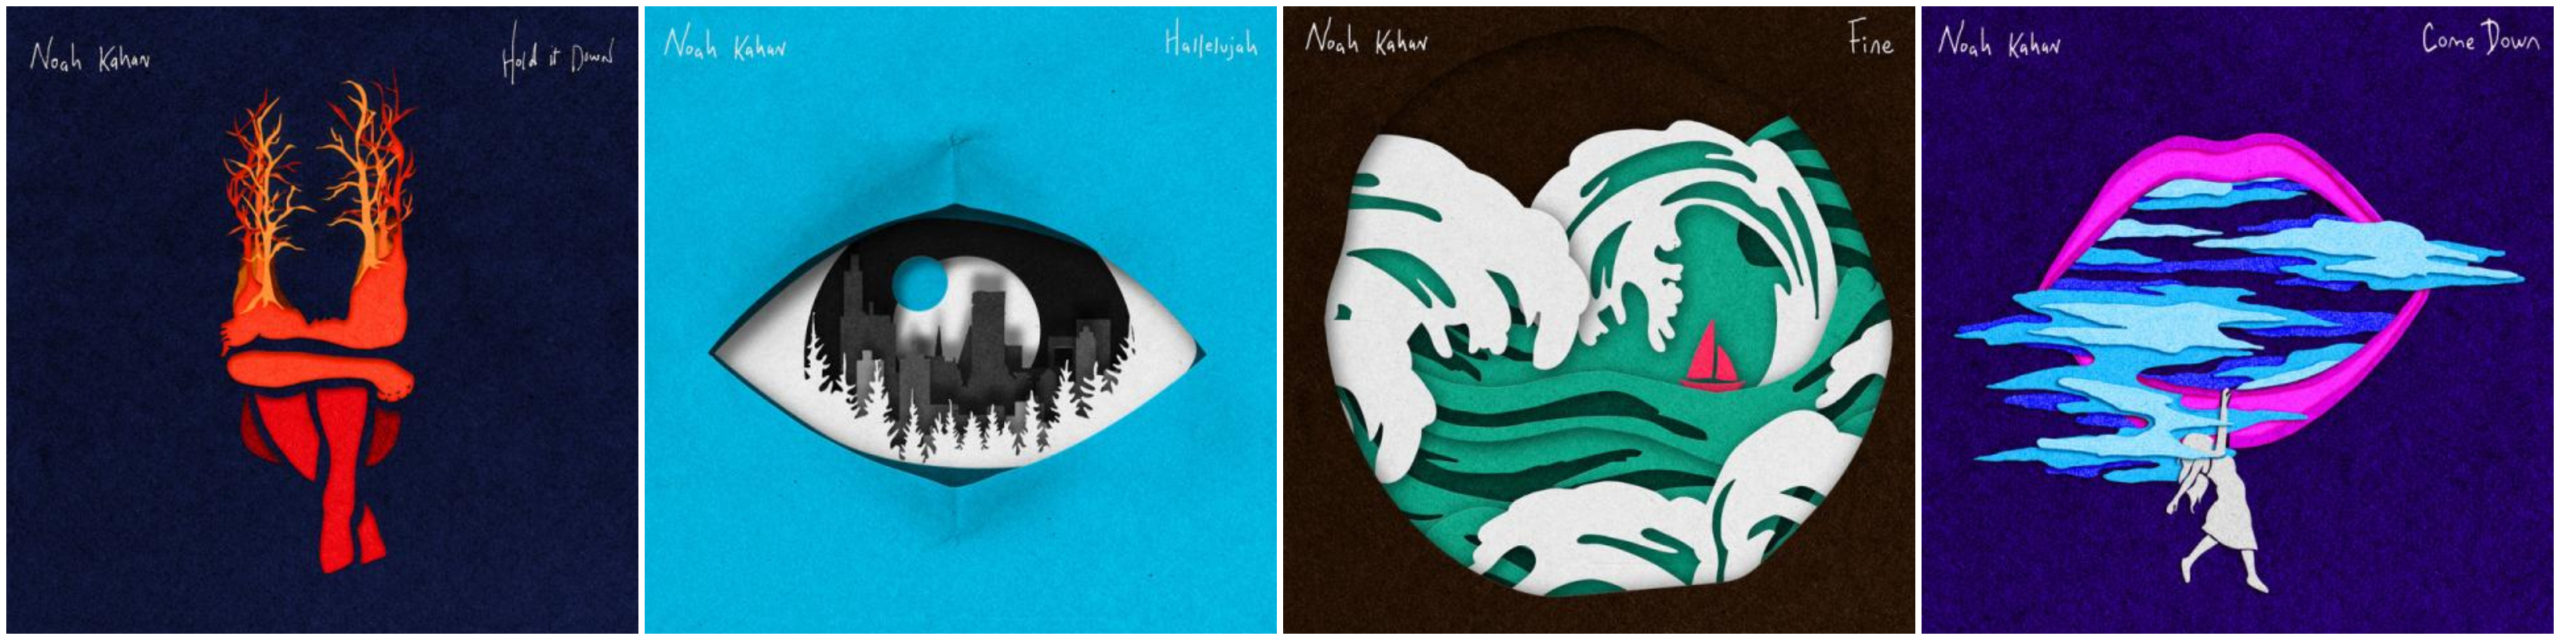 Four single covers all stylized and side-by-side in a collage.